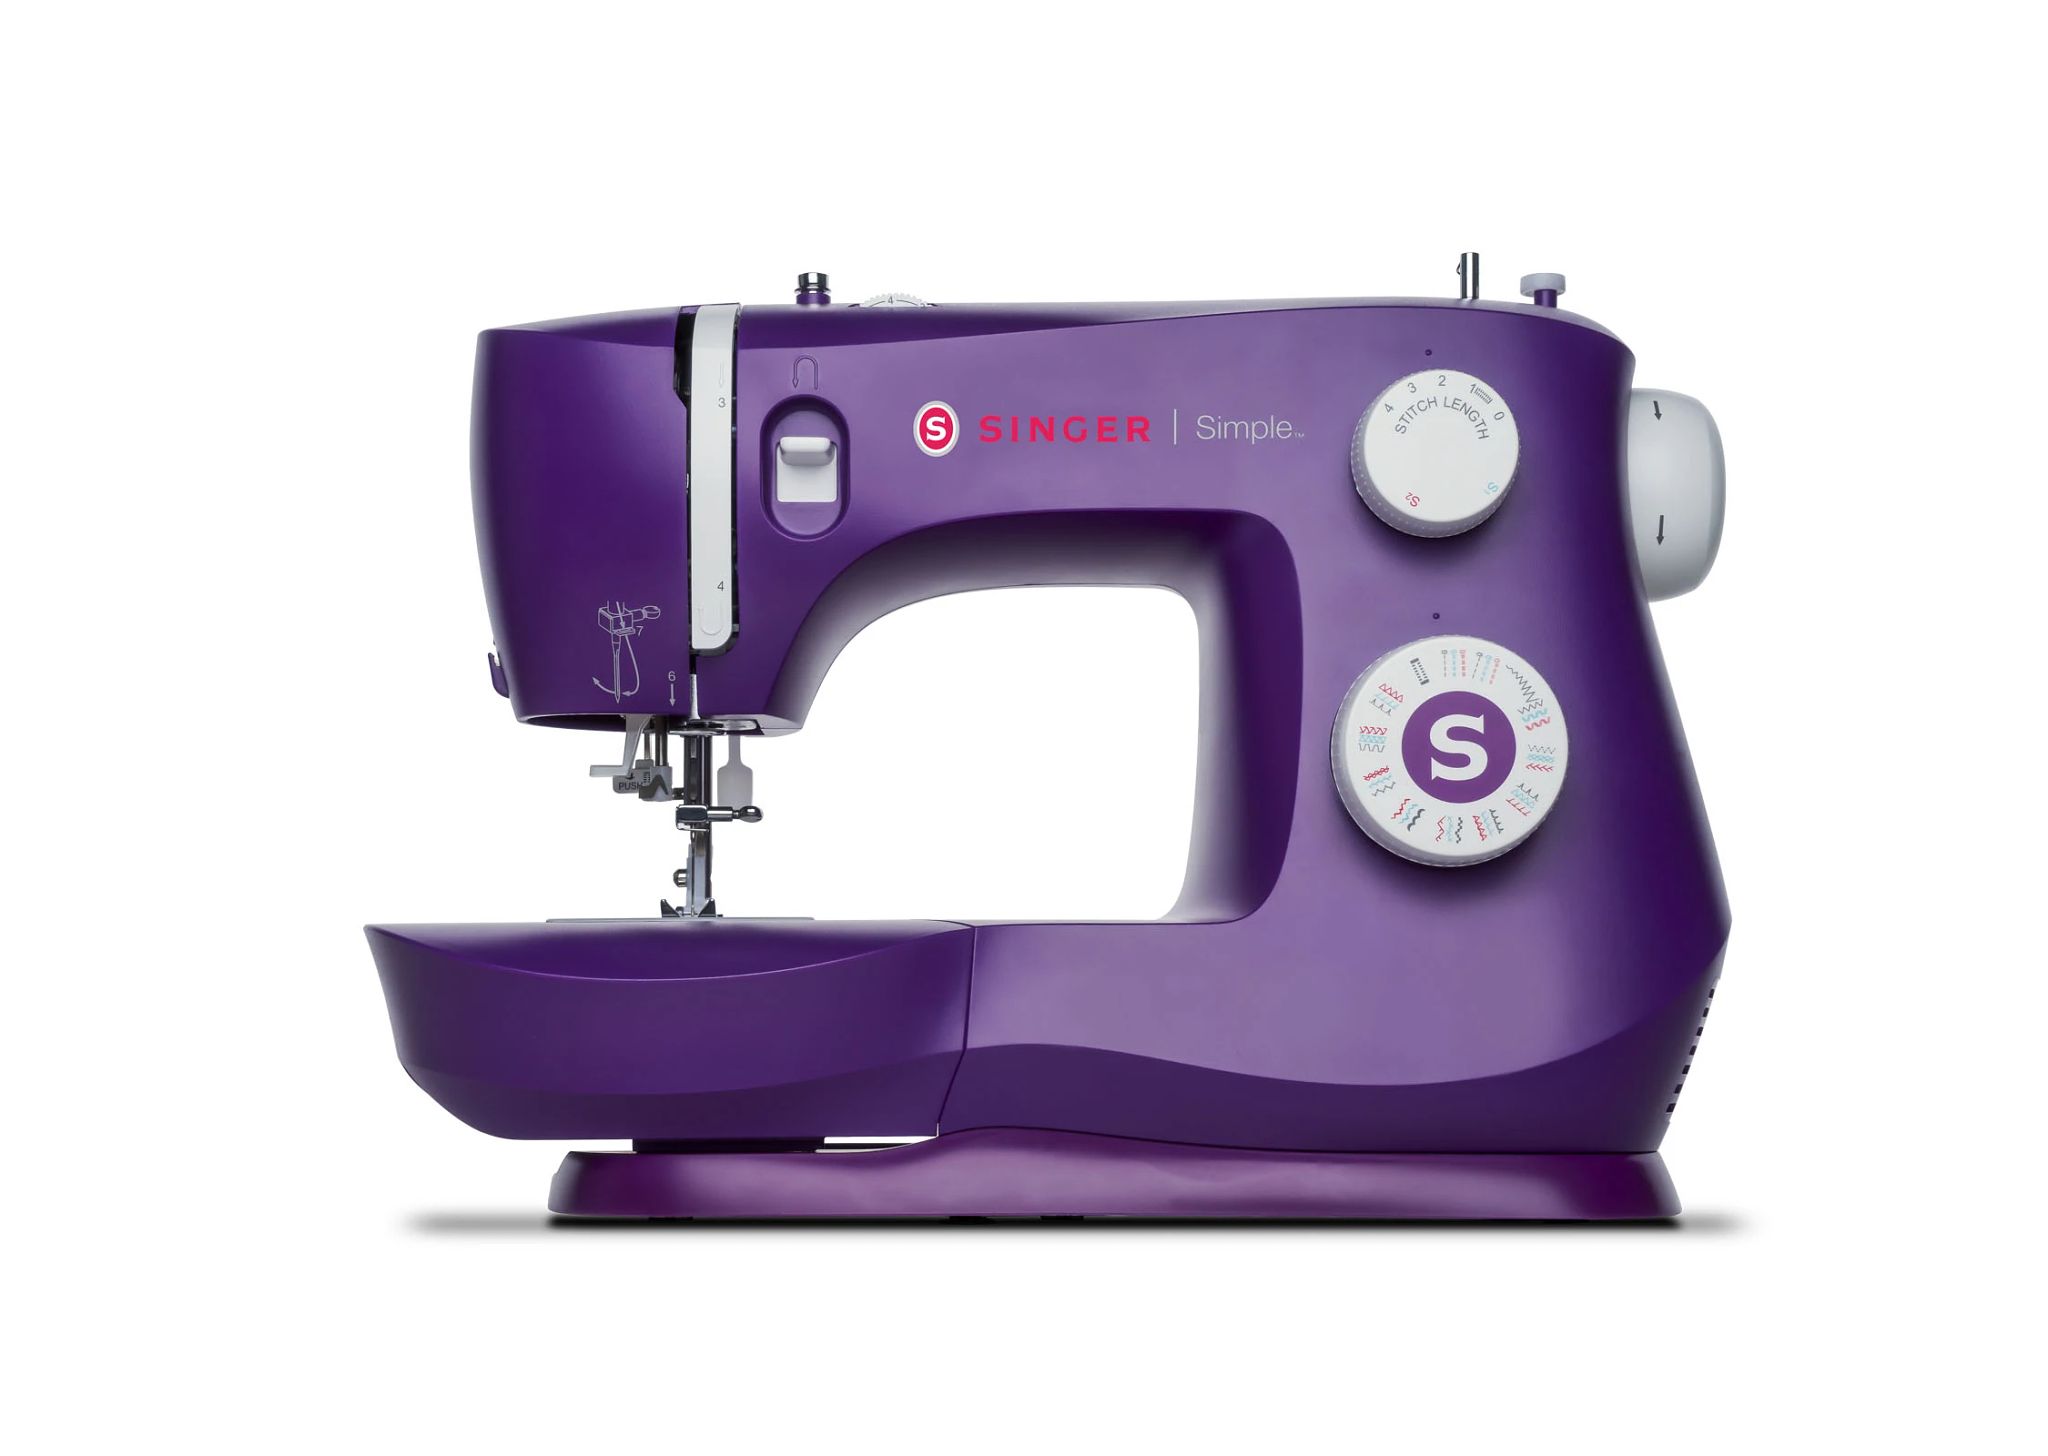 Testing 3 Sewing Machine Gadgets - Singer Stitch Quick + Sewing